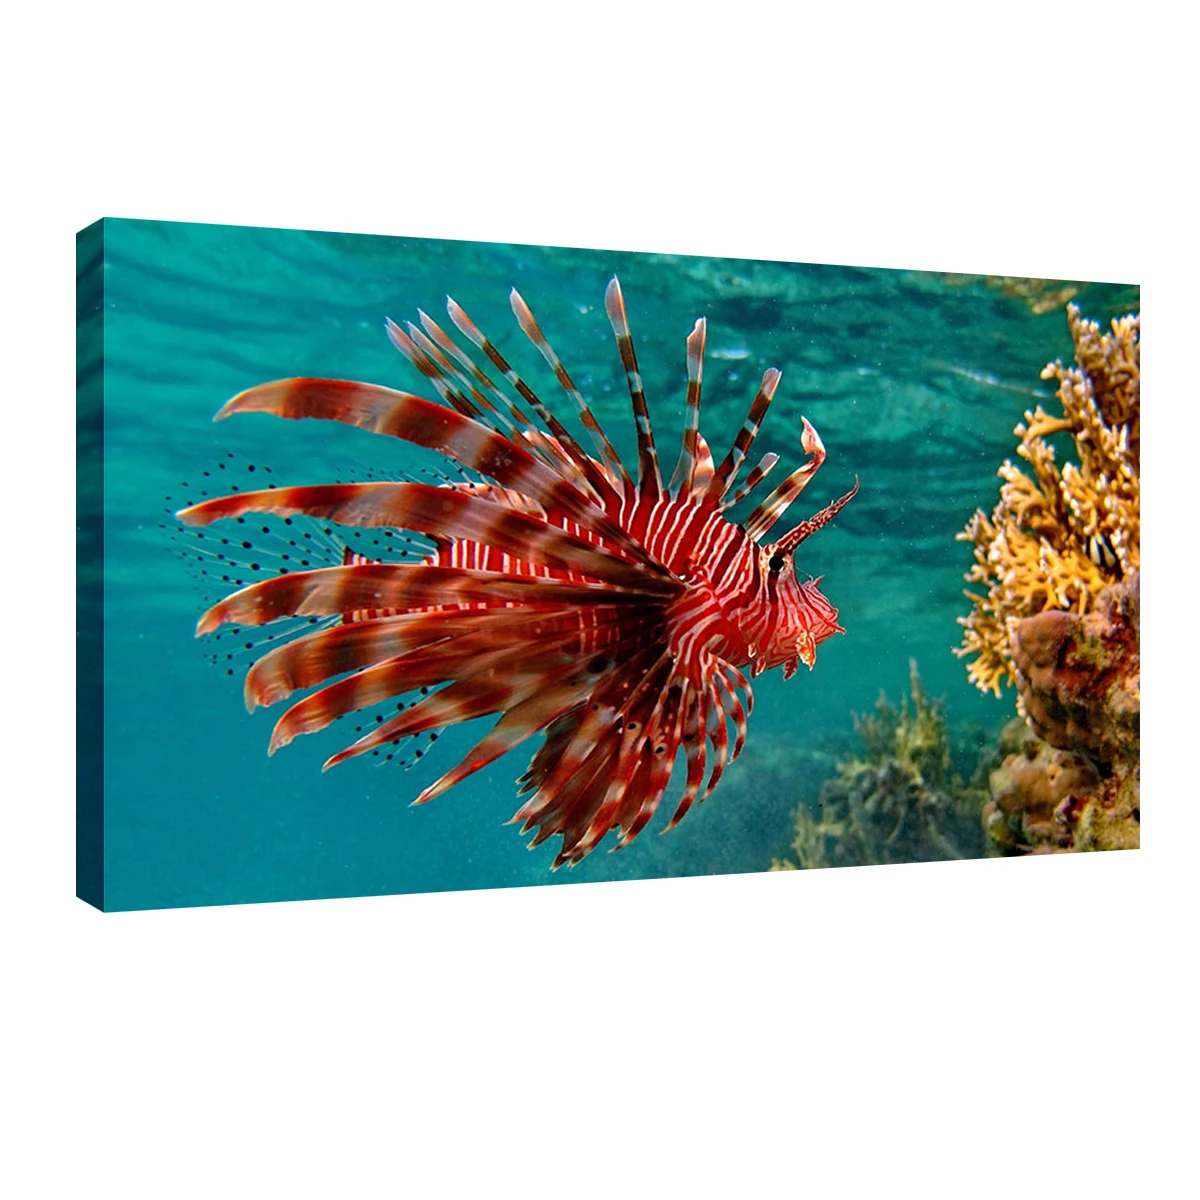 

Sea Fish Wall Art Bedroom Decor Ocean Scene Canvas Prints Home Paintings Tropical Ocean View Wall Decor for Living Room